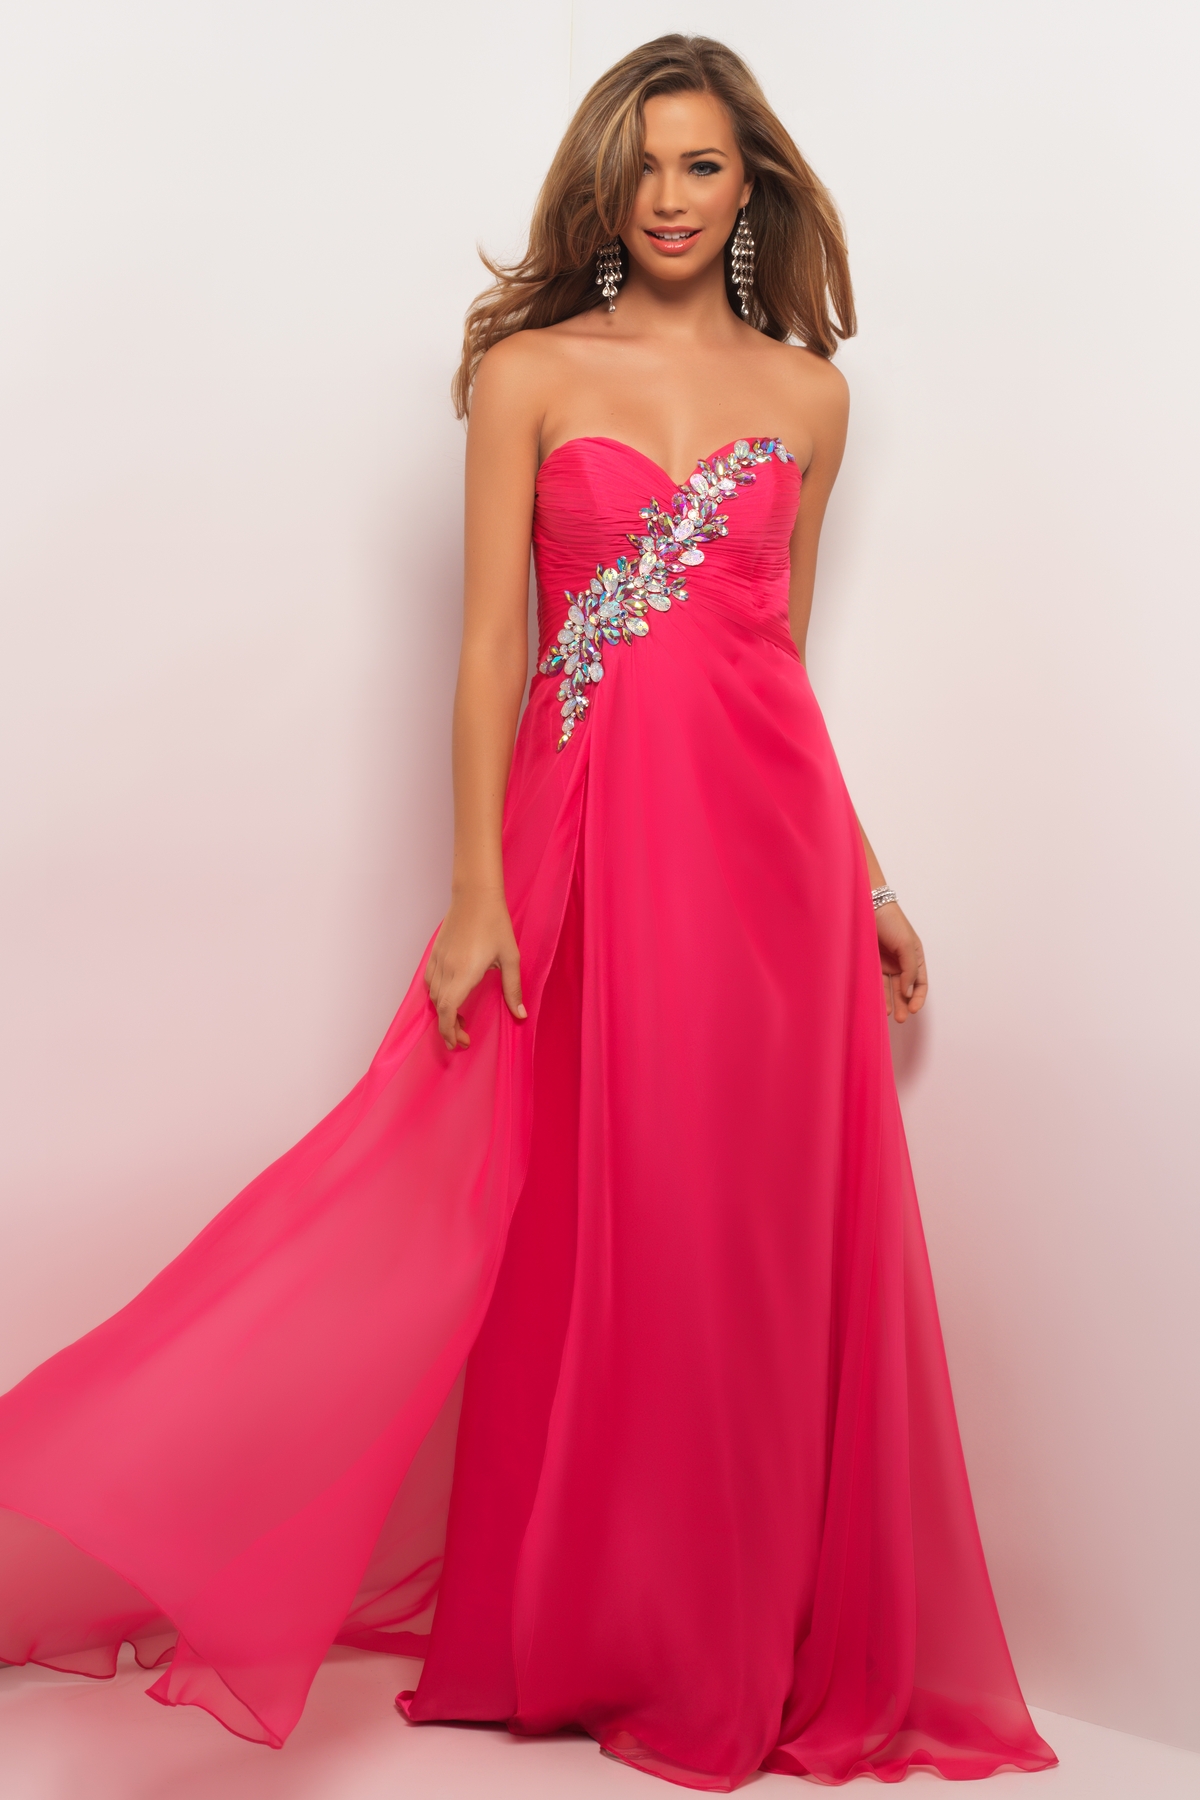 25 Stunning Prom Dresses Inspiration – The WoW Style